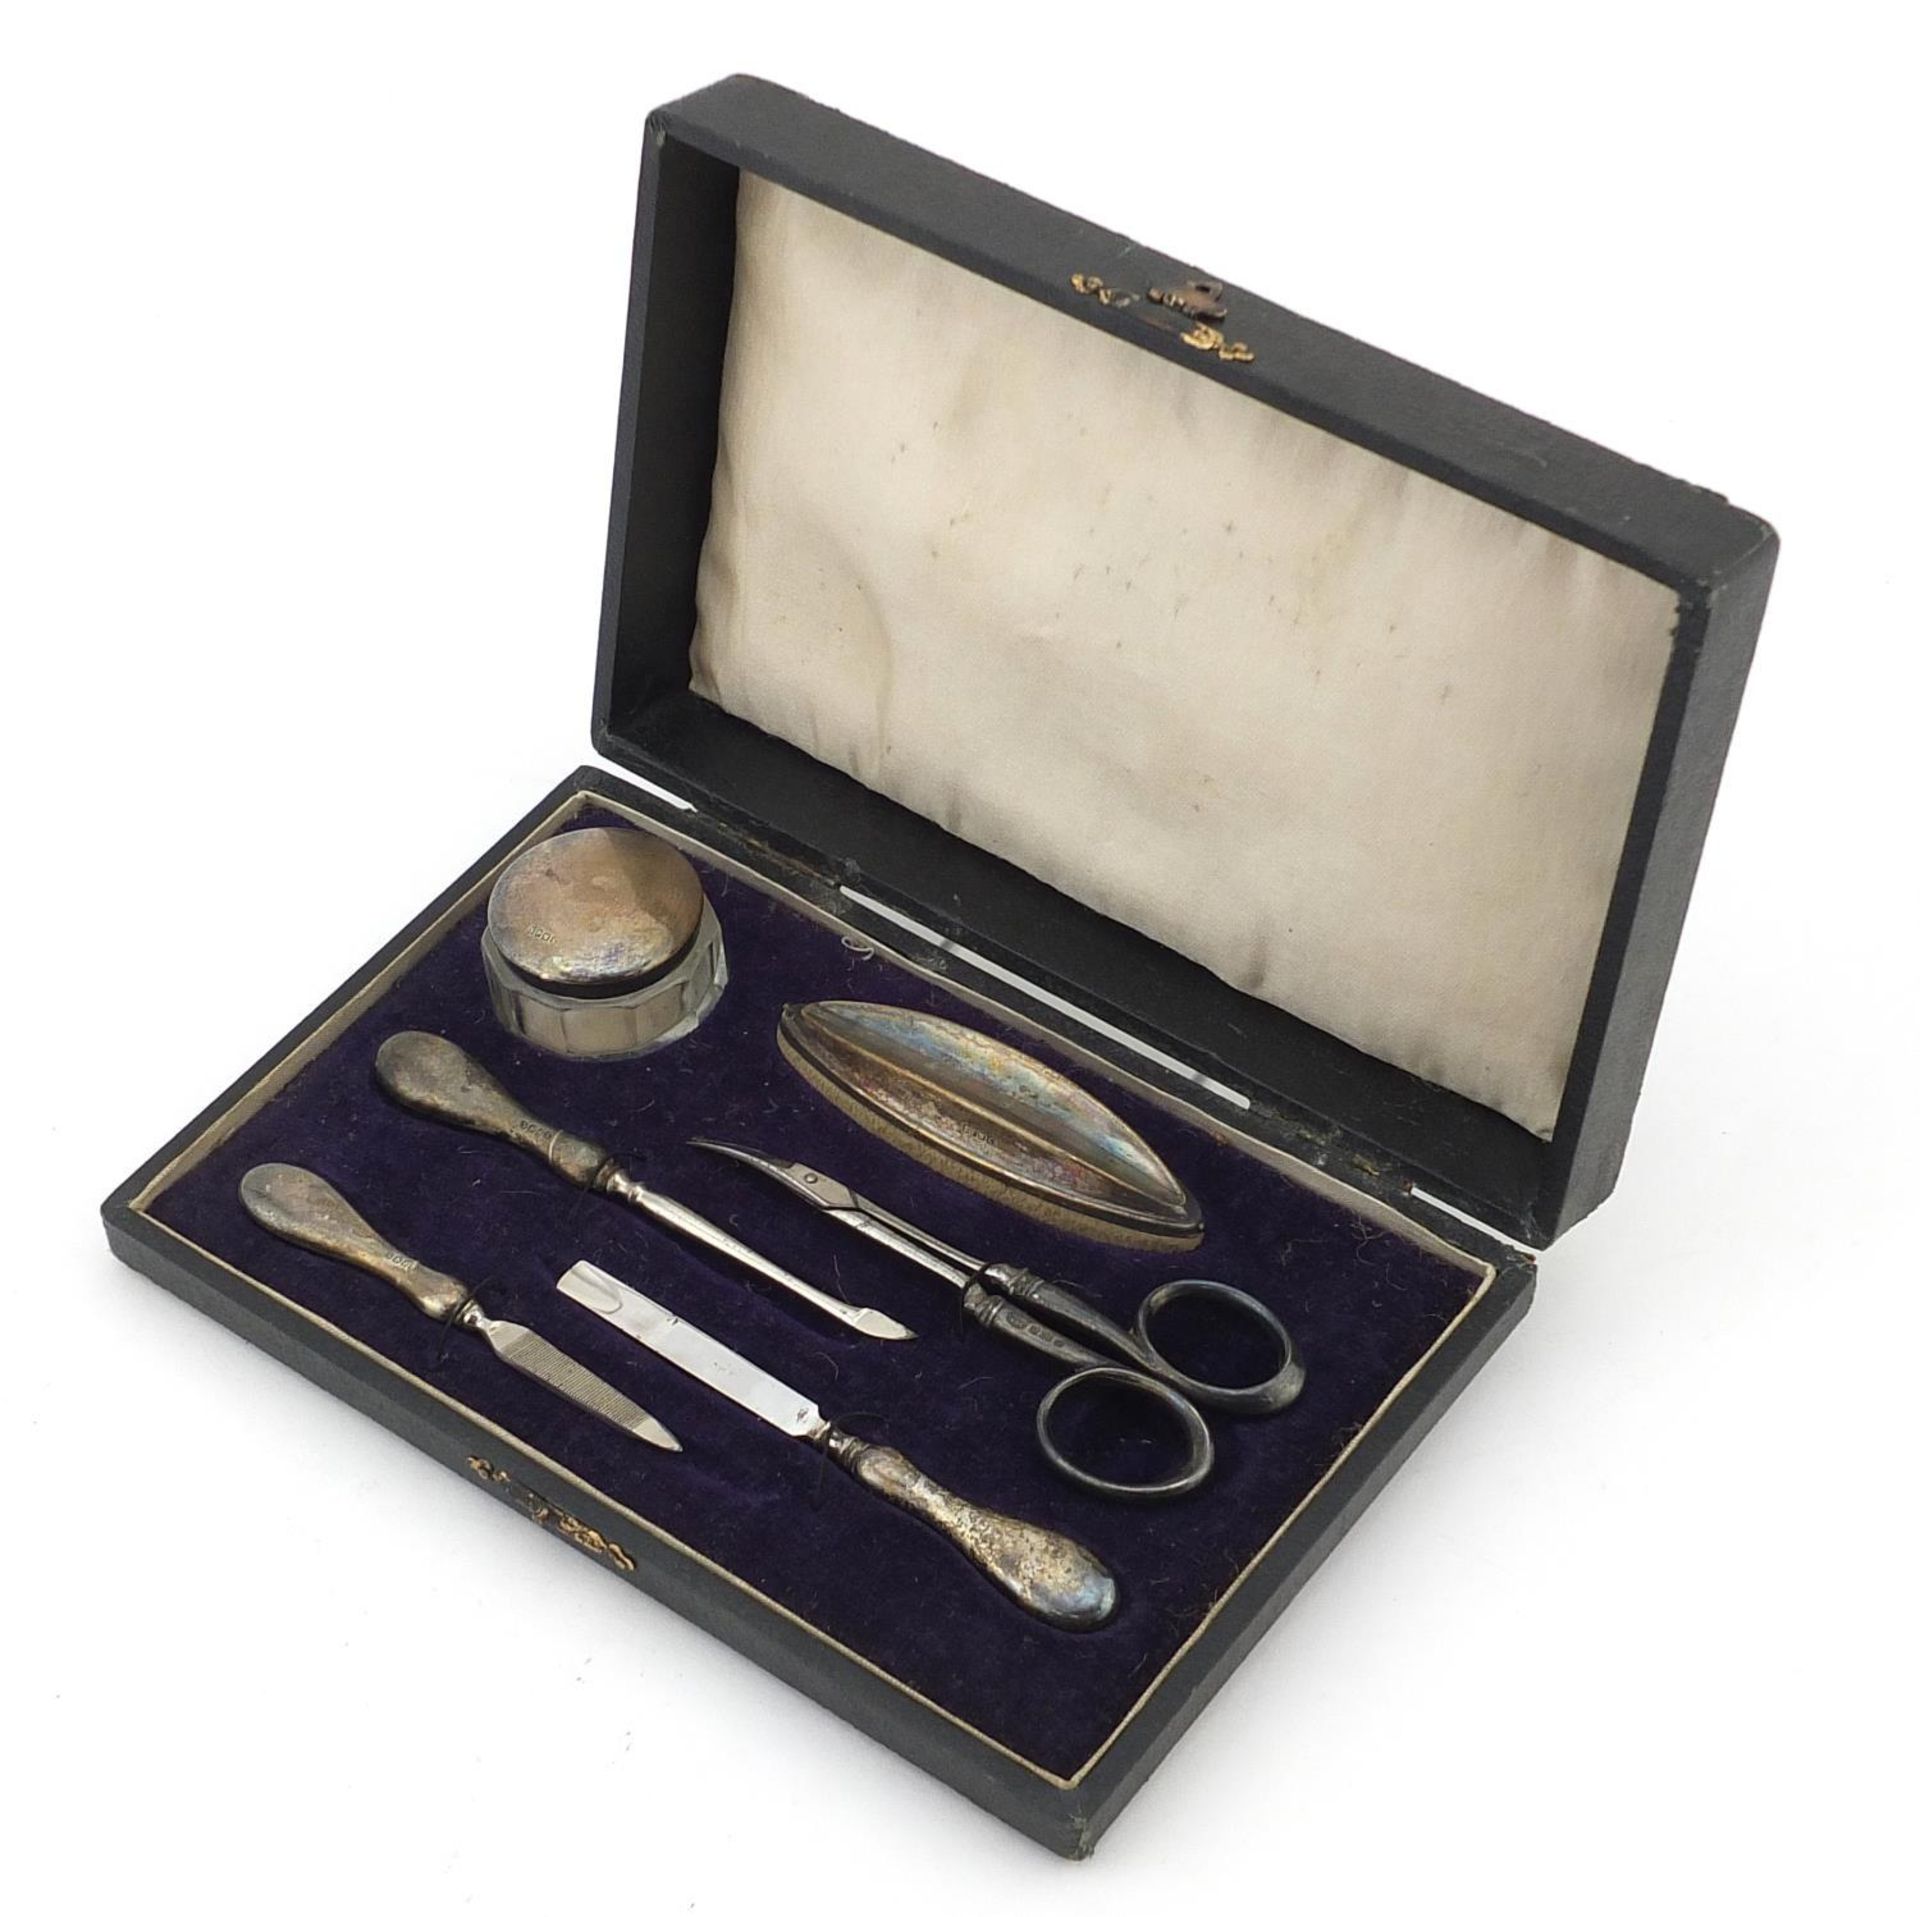 19th century silver plated six piece vanity tool set housed in a velvet and silk lined fitted case - Image 7 of 7